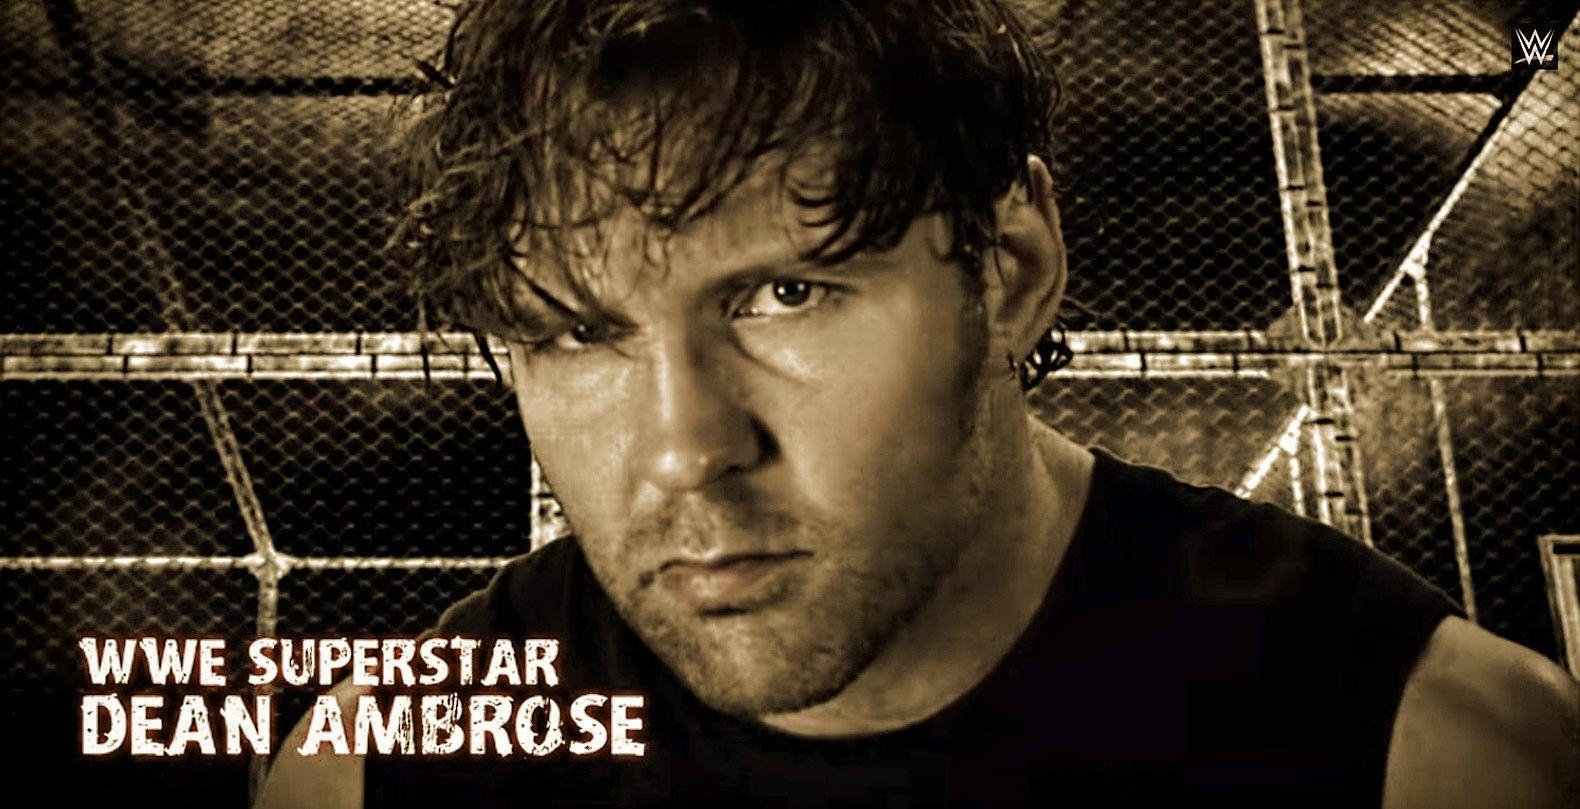 Dean Ambrose HD Wallpaper Wallpaper Background of Your Choice